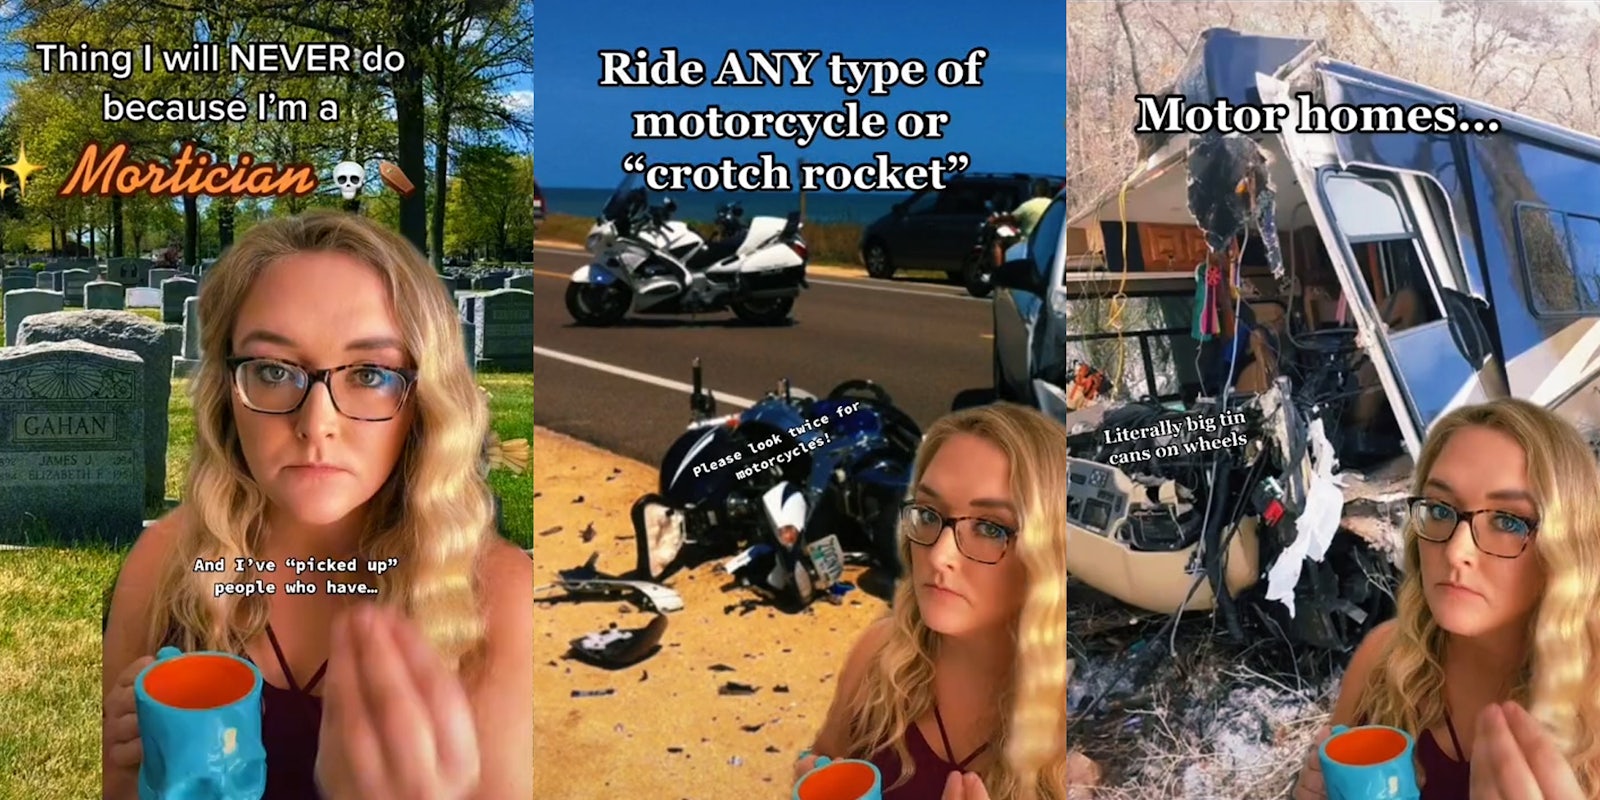 Young woman holding cup and cemetary background with caption 'thing i will never do because i'm a mortician' (l) woman with cup and motorcycle wreck background with caption 'ride any type of motorcycle or crotch rocket' (c) woman with cup and motor home wreck background with caption 'motor homes... literally big tin cans on wheels'